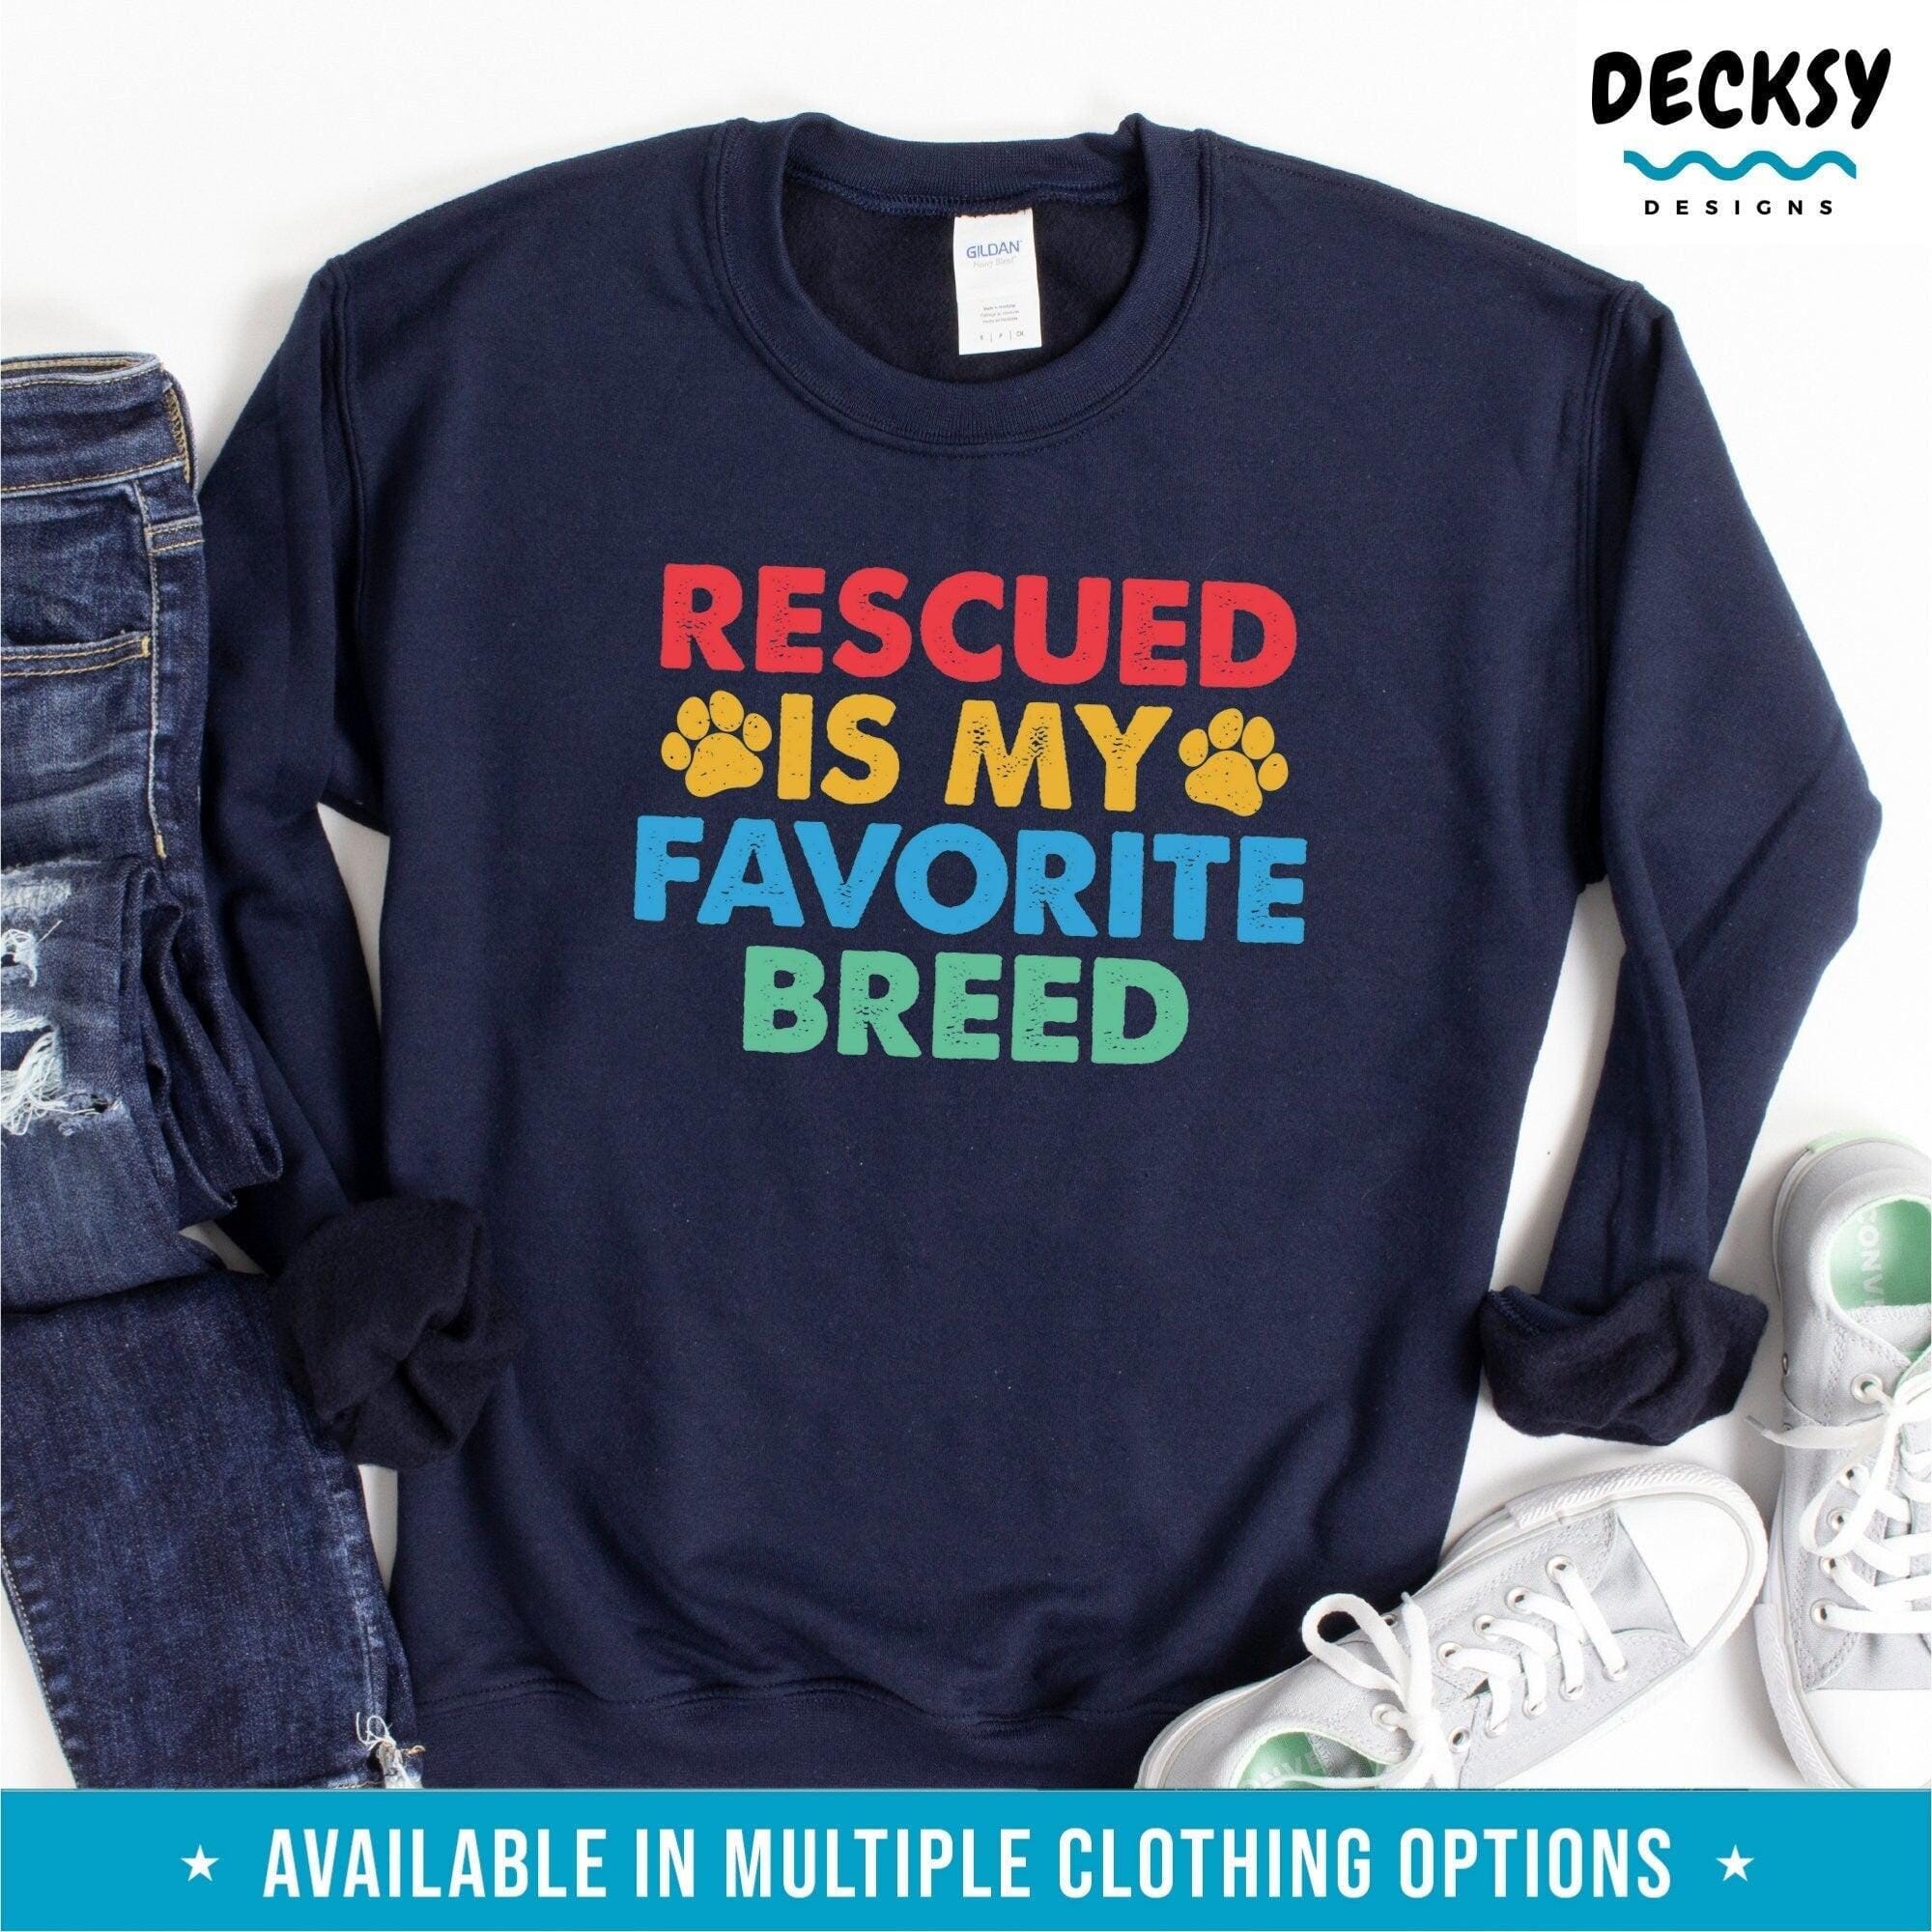 Dog Rescuer Shirt, Animal Lover Gift-Clothing:Gender-Neutral Adult Clothing:Tops & Tees:T-shirts:Graphic Tees-DecksyDesigns